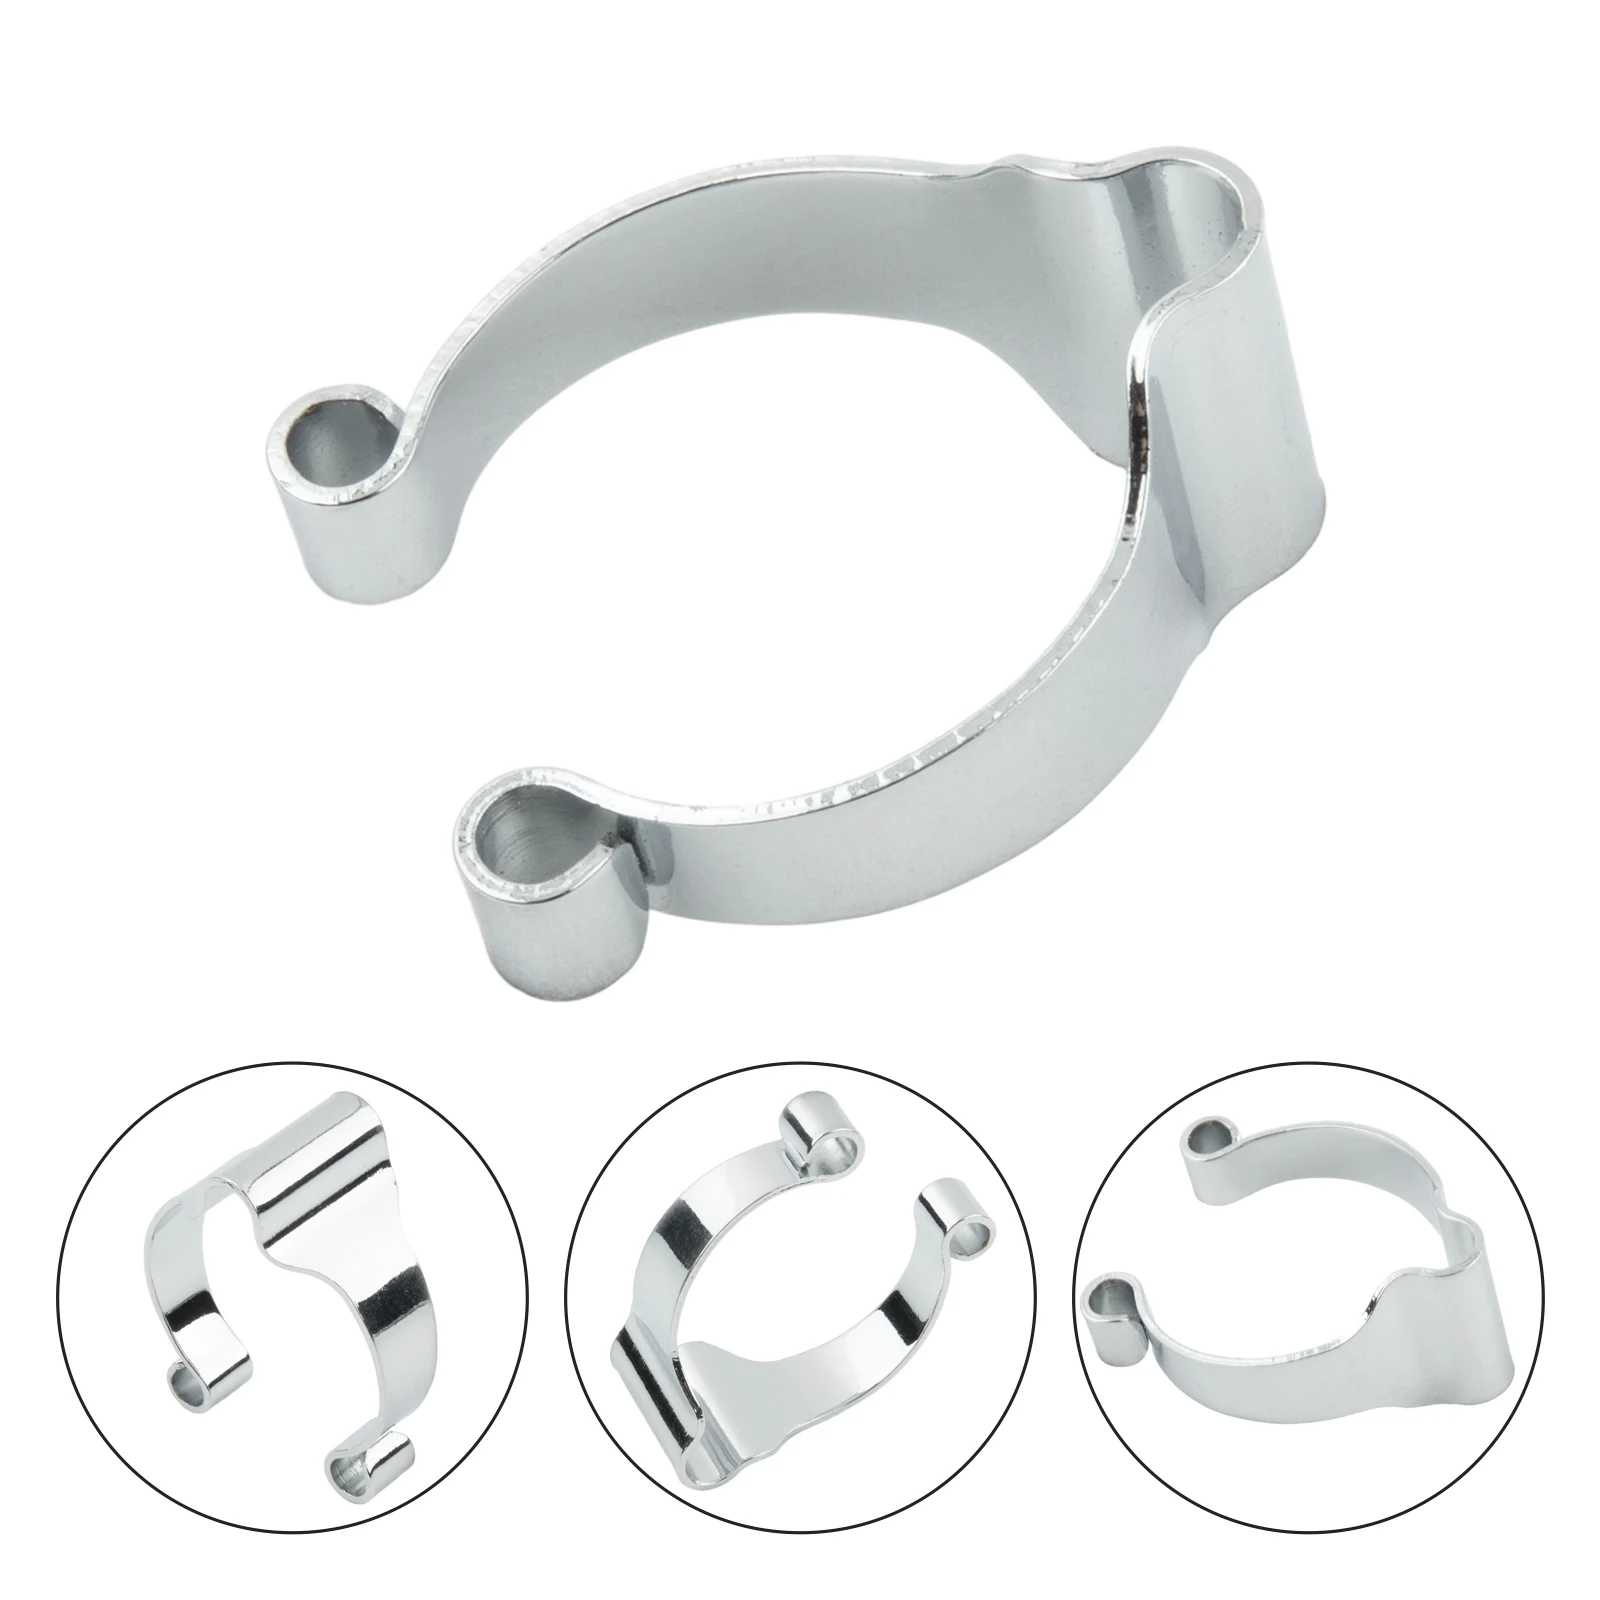 

Brake Hose Guide Cable Clips Clamp Retro Cars Silver Steel 32x16mm Cable Holder Fix Brake Wire Fix Shifting Cable